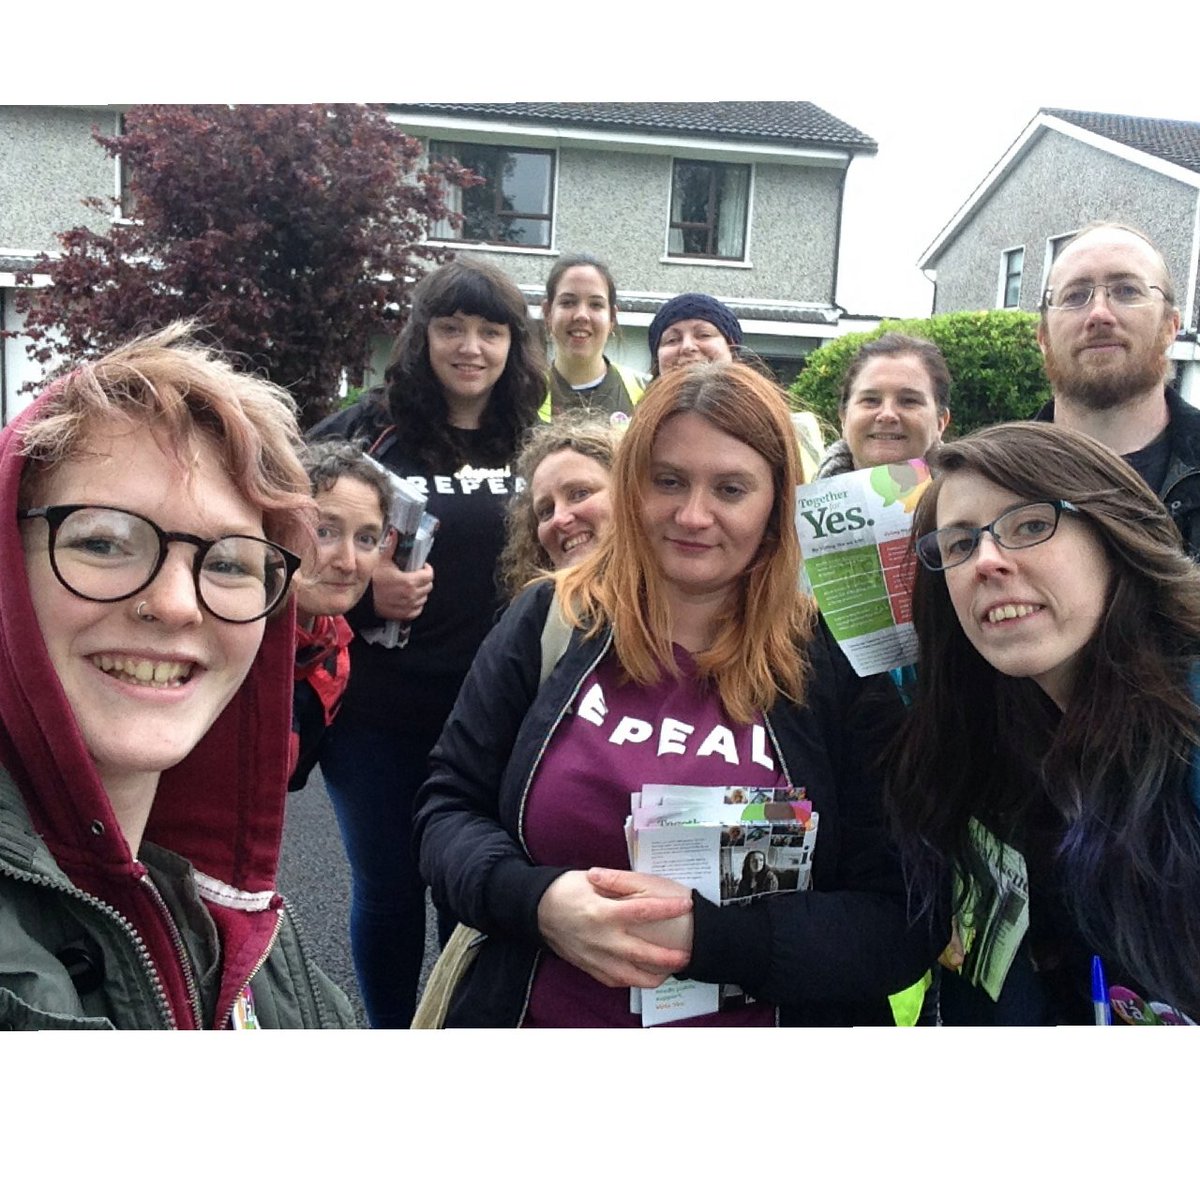 There was a crack-commando canvassing team from Ballina-Killaloe across to Nenagh. Shout out to @cathpow @DavidAh99173523 @tippgreensrose, Anne-Marie K,  @CNaugh2, Cathal, Fiona Bonfield & all the  #TippRepealers we've missed 